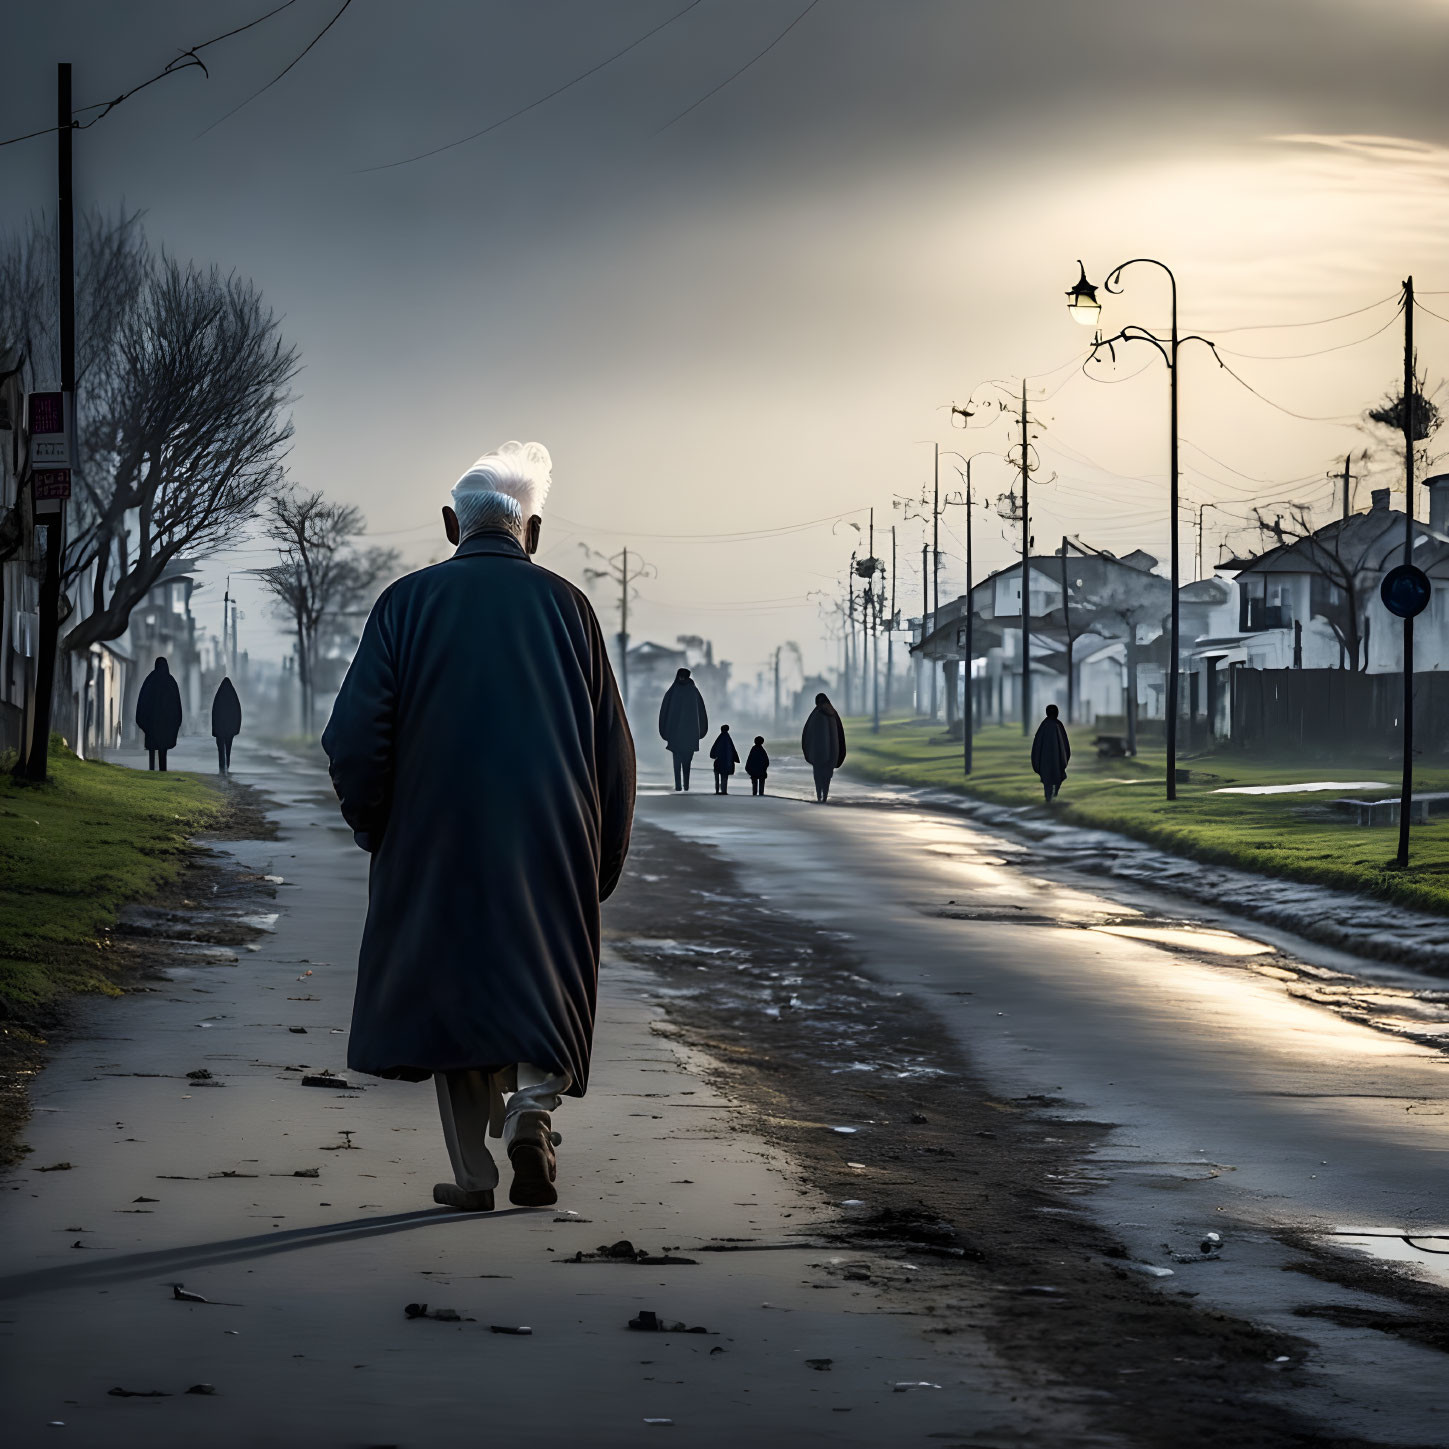 Elderly person with white hair walking on misty, lamp-lit street